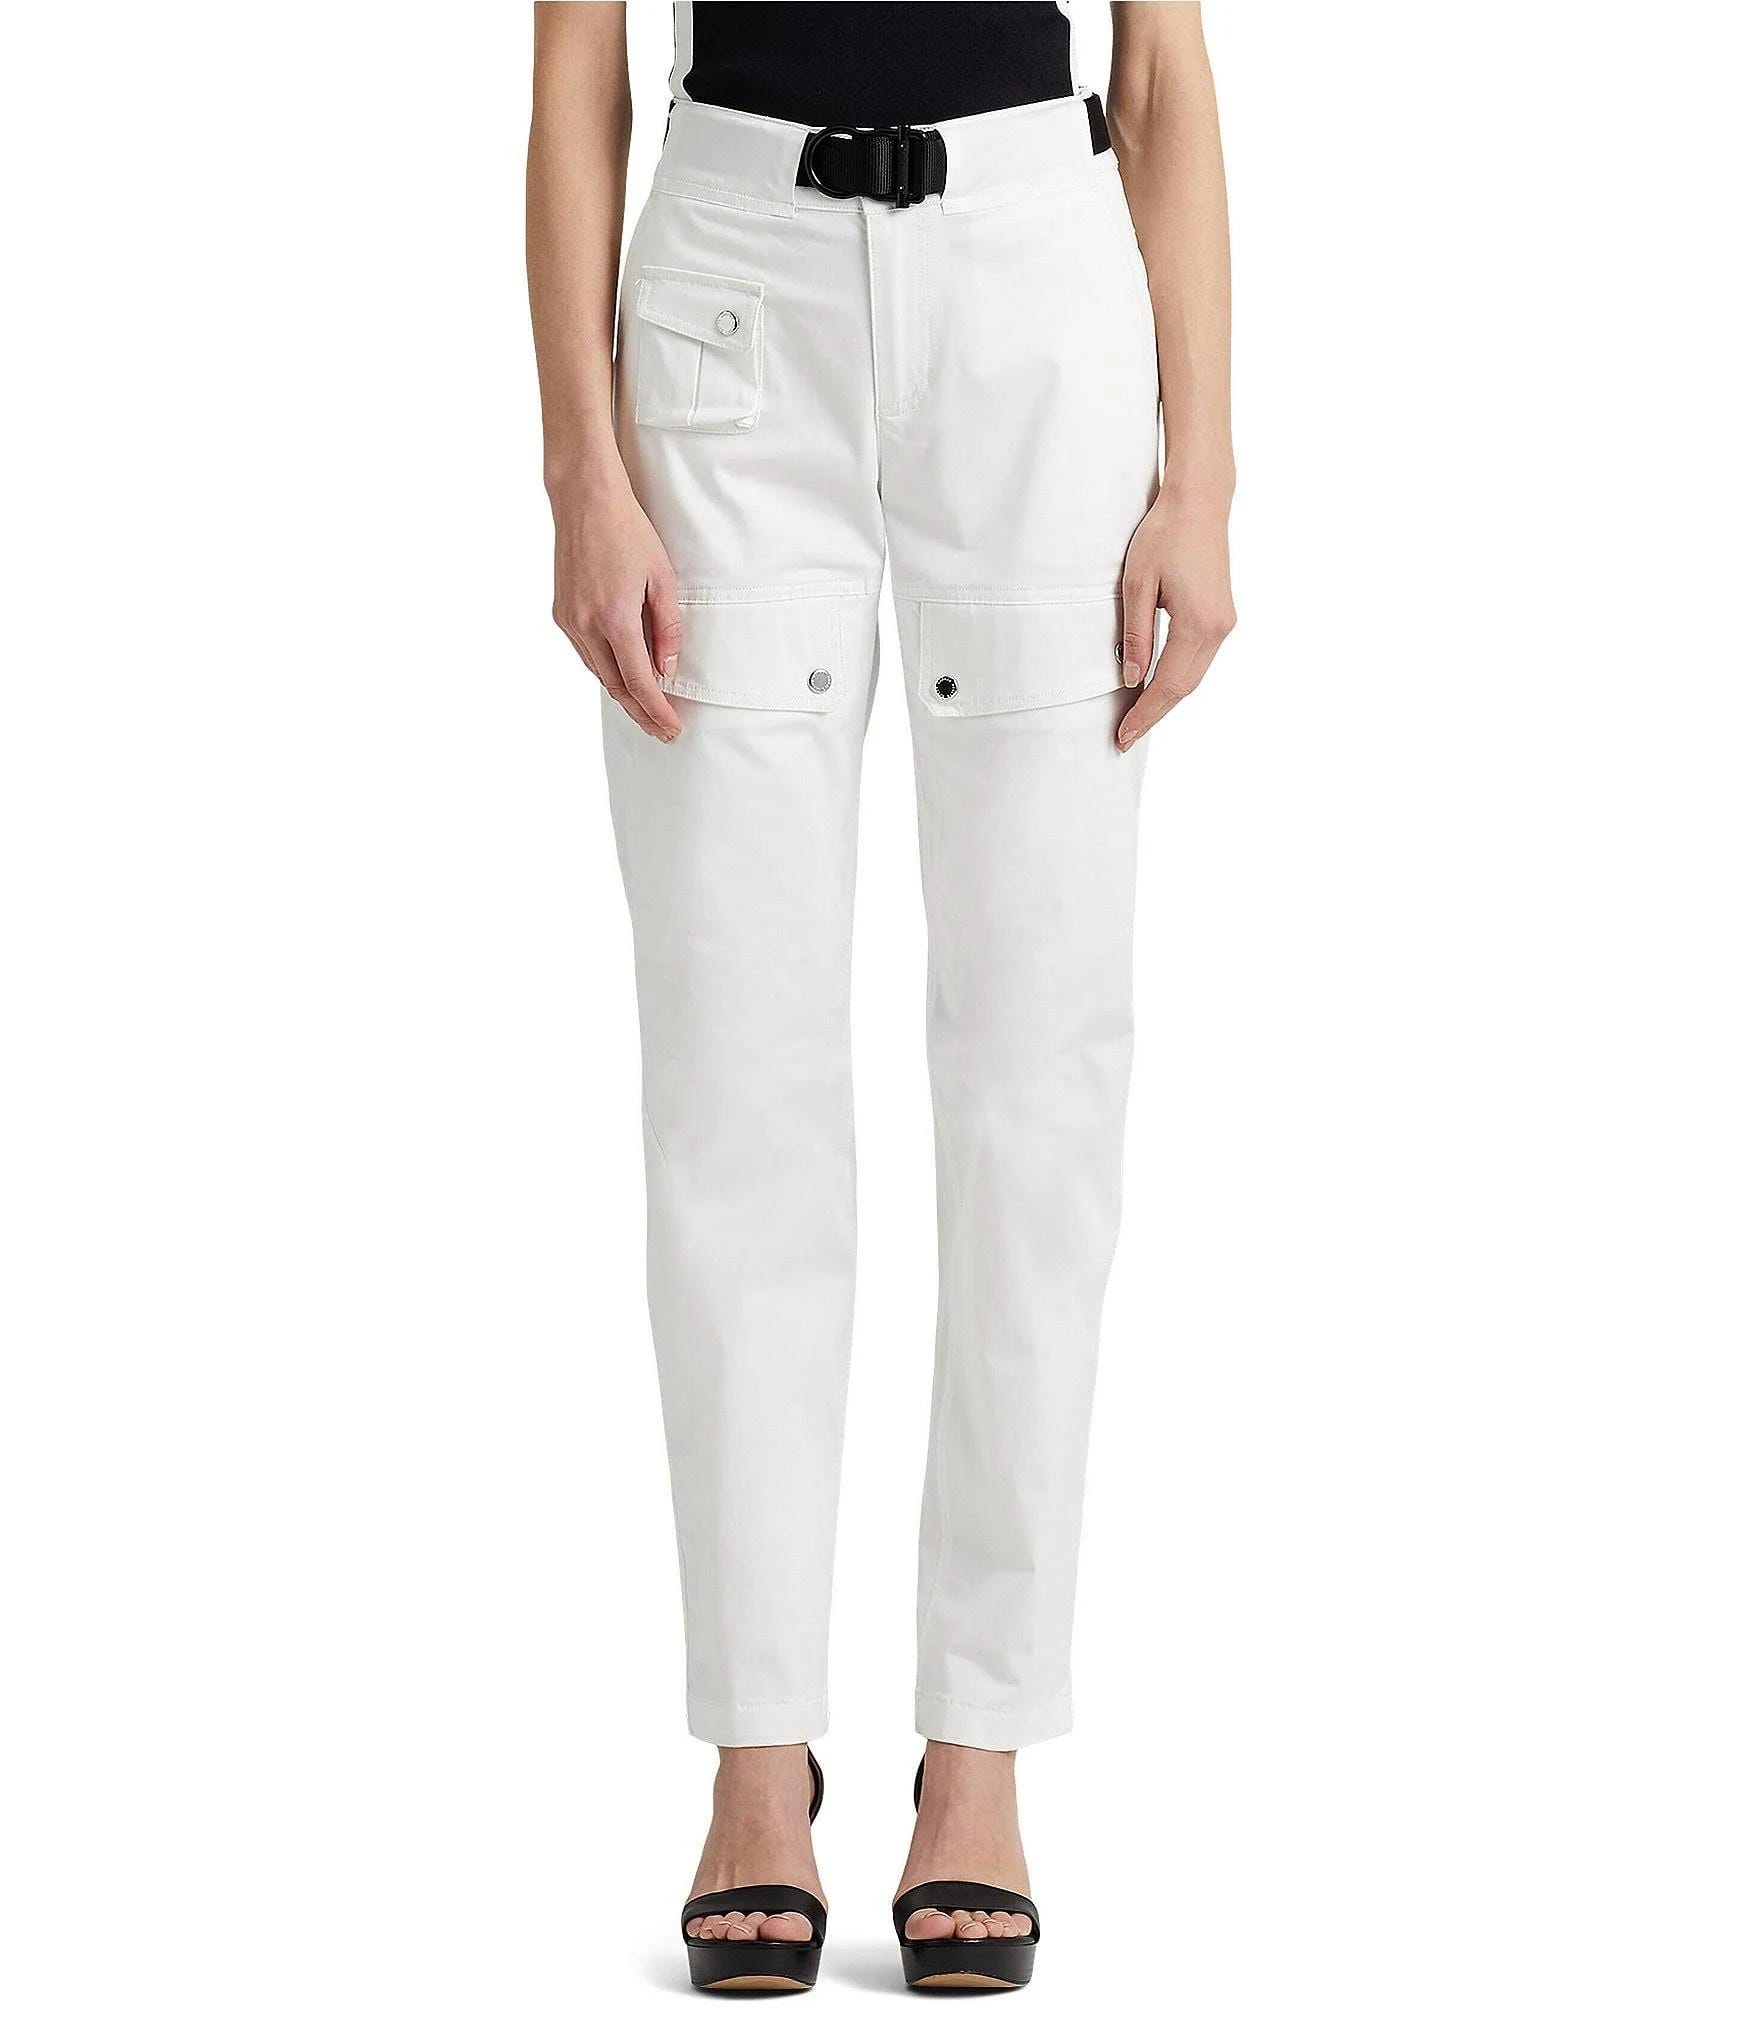 Luxurious White Sateen Cargo Pants with Belted Design | Image